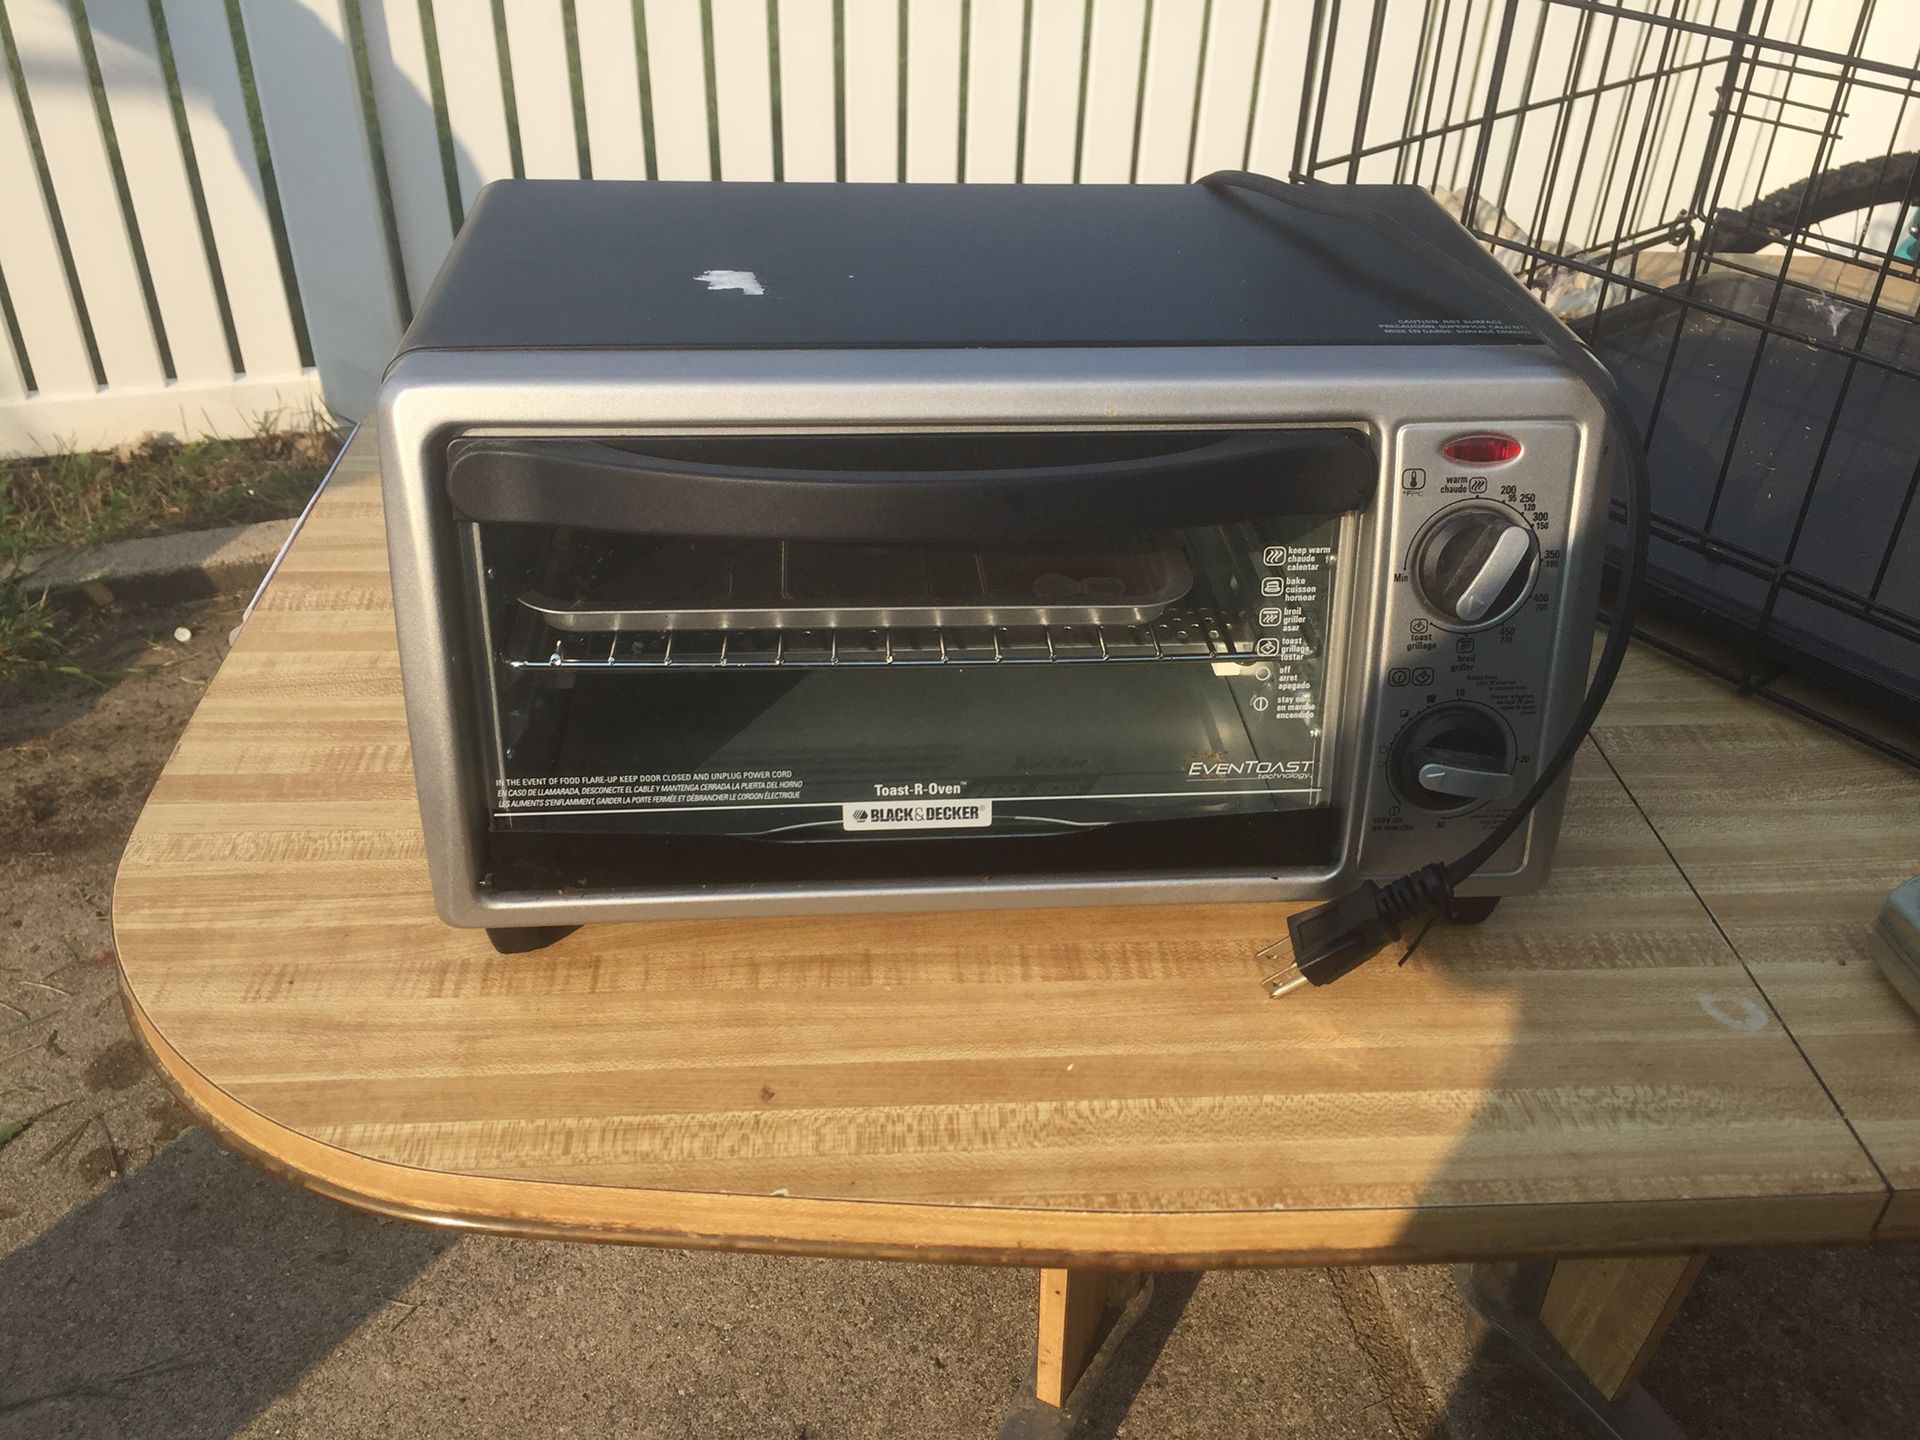 Working and clean toaster oven